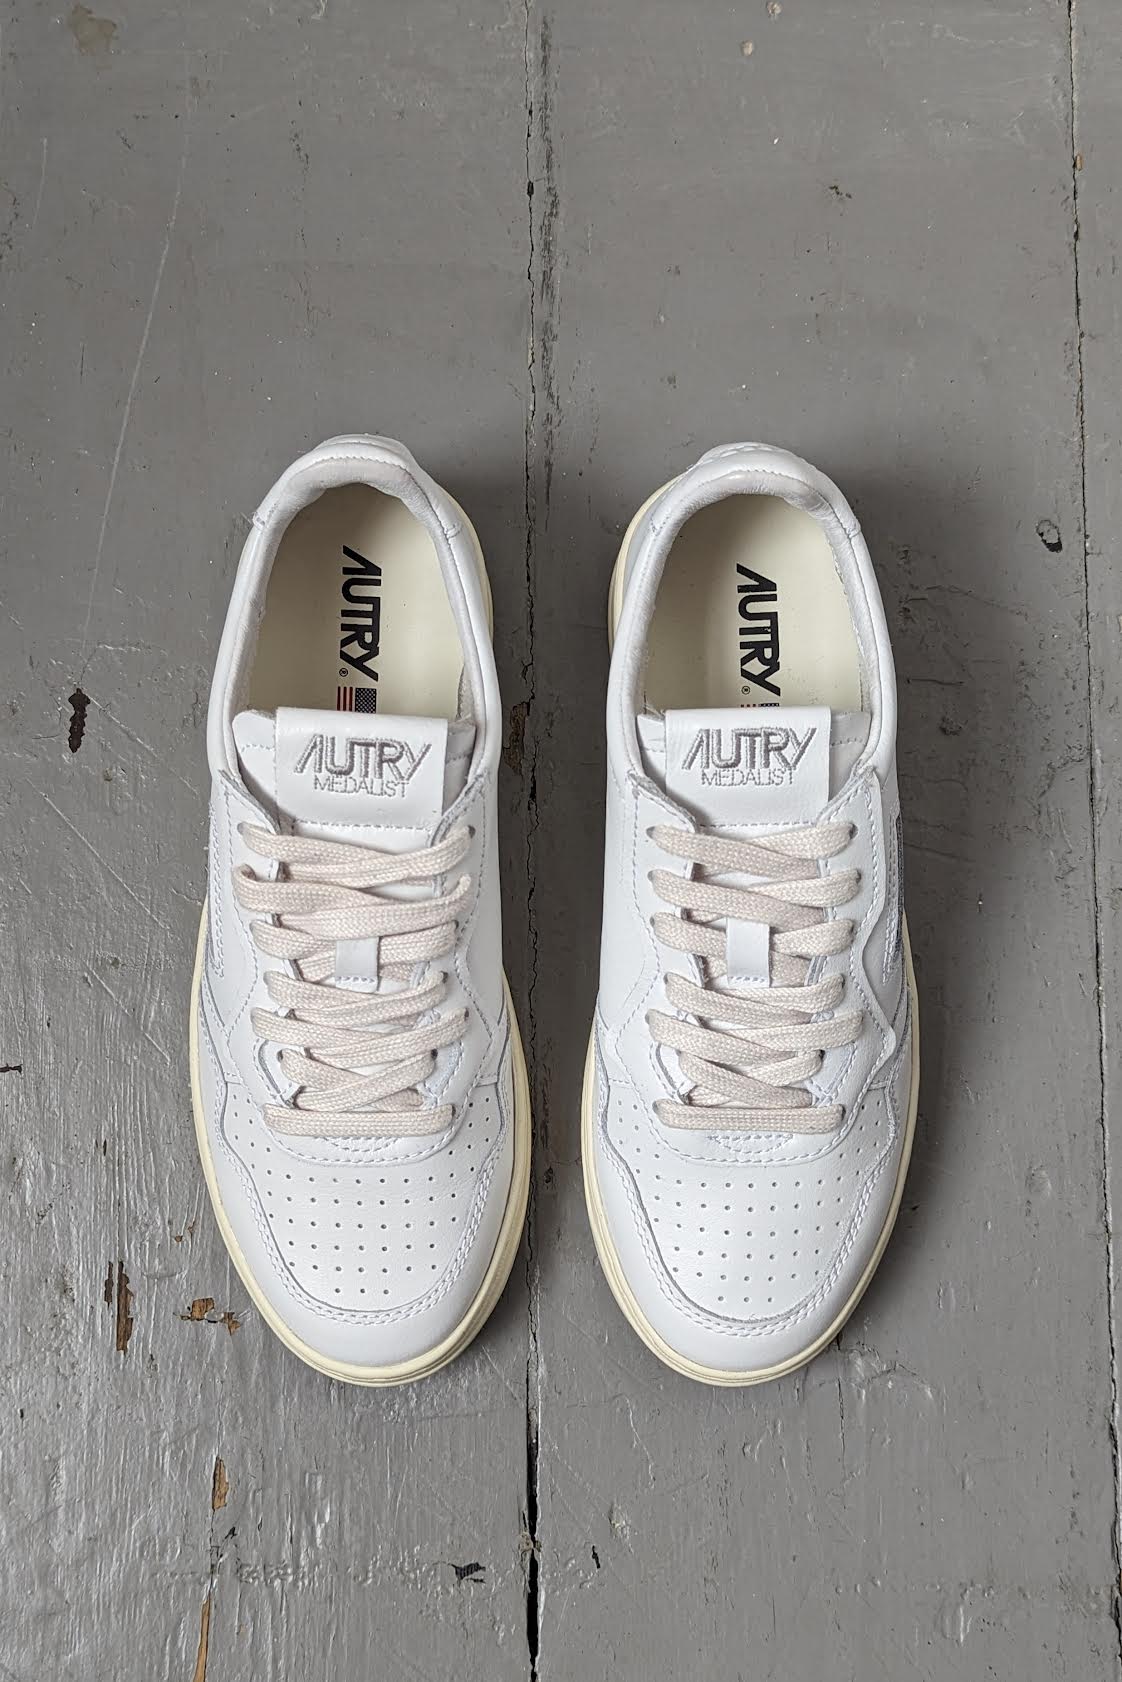 Medalist White Leather Sneakers